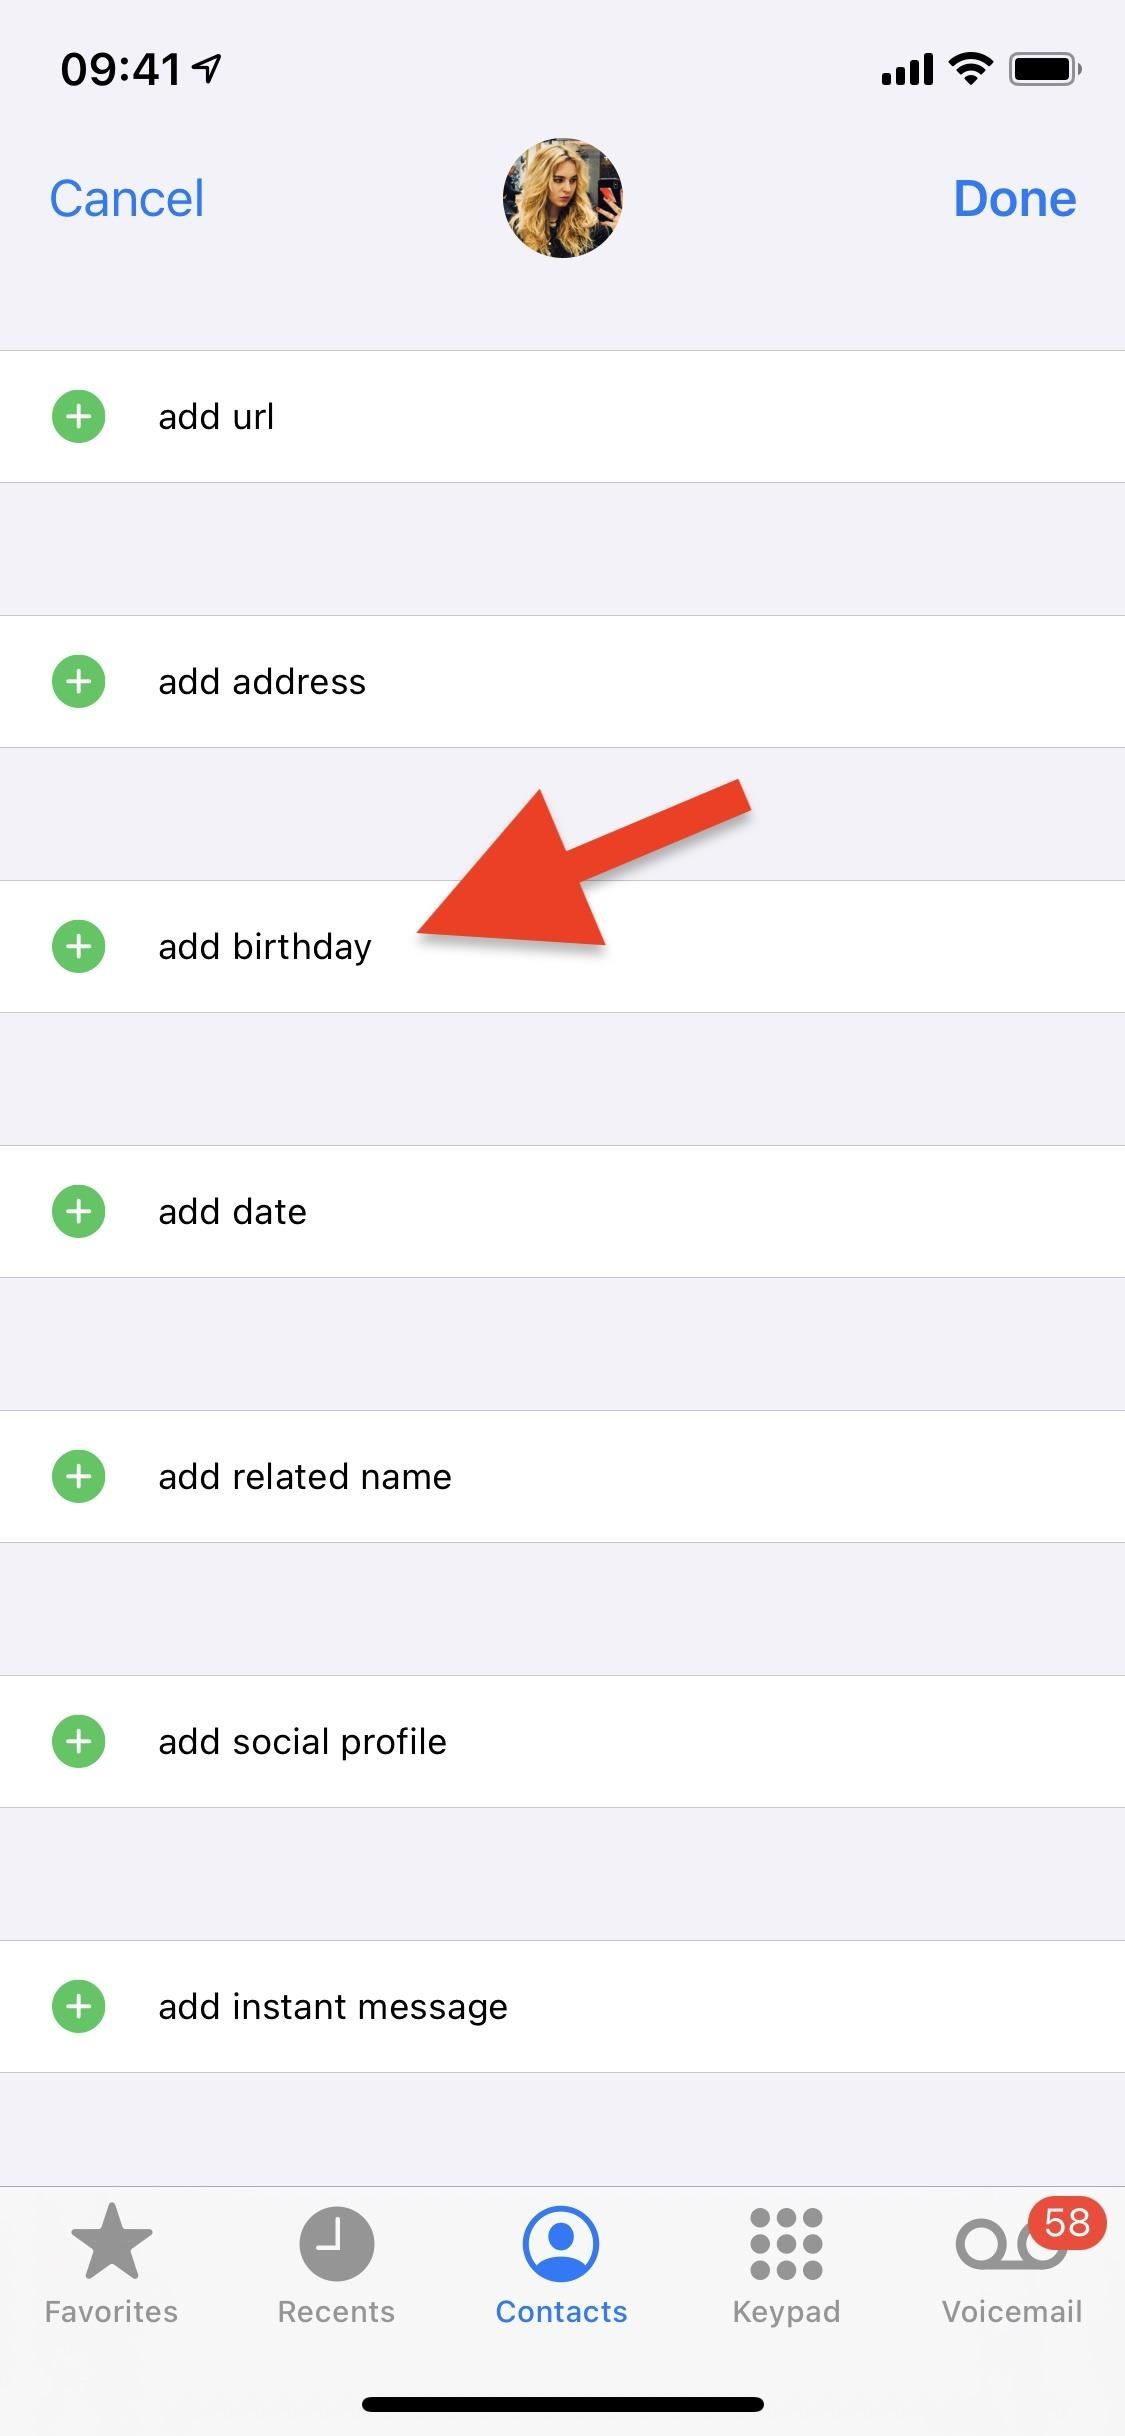 This Shortcut Automates Sending Birthday Wishes to Your Contacts So You Never Have to Remember Again